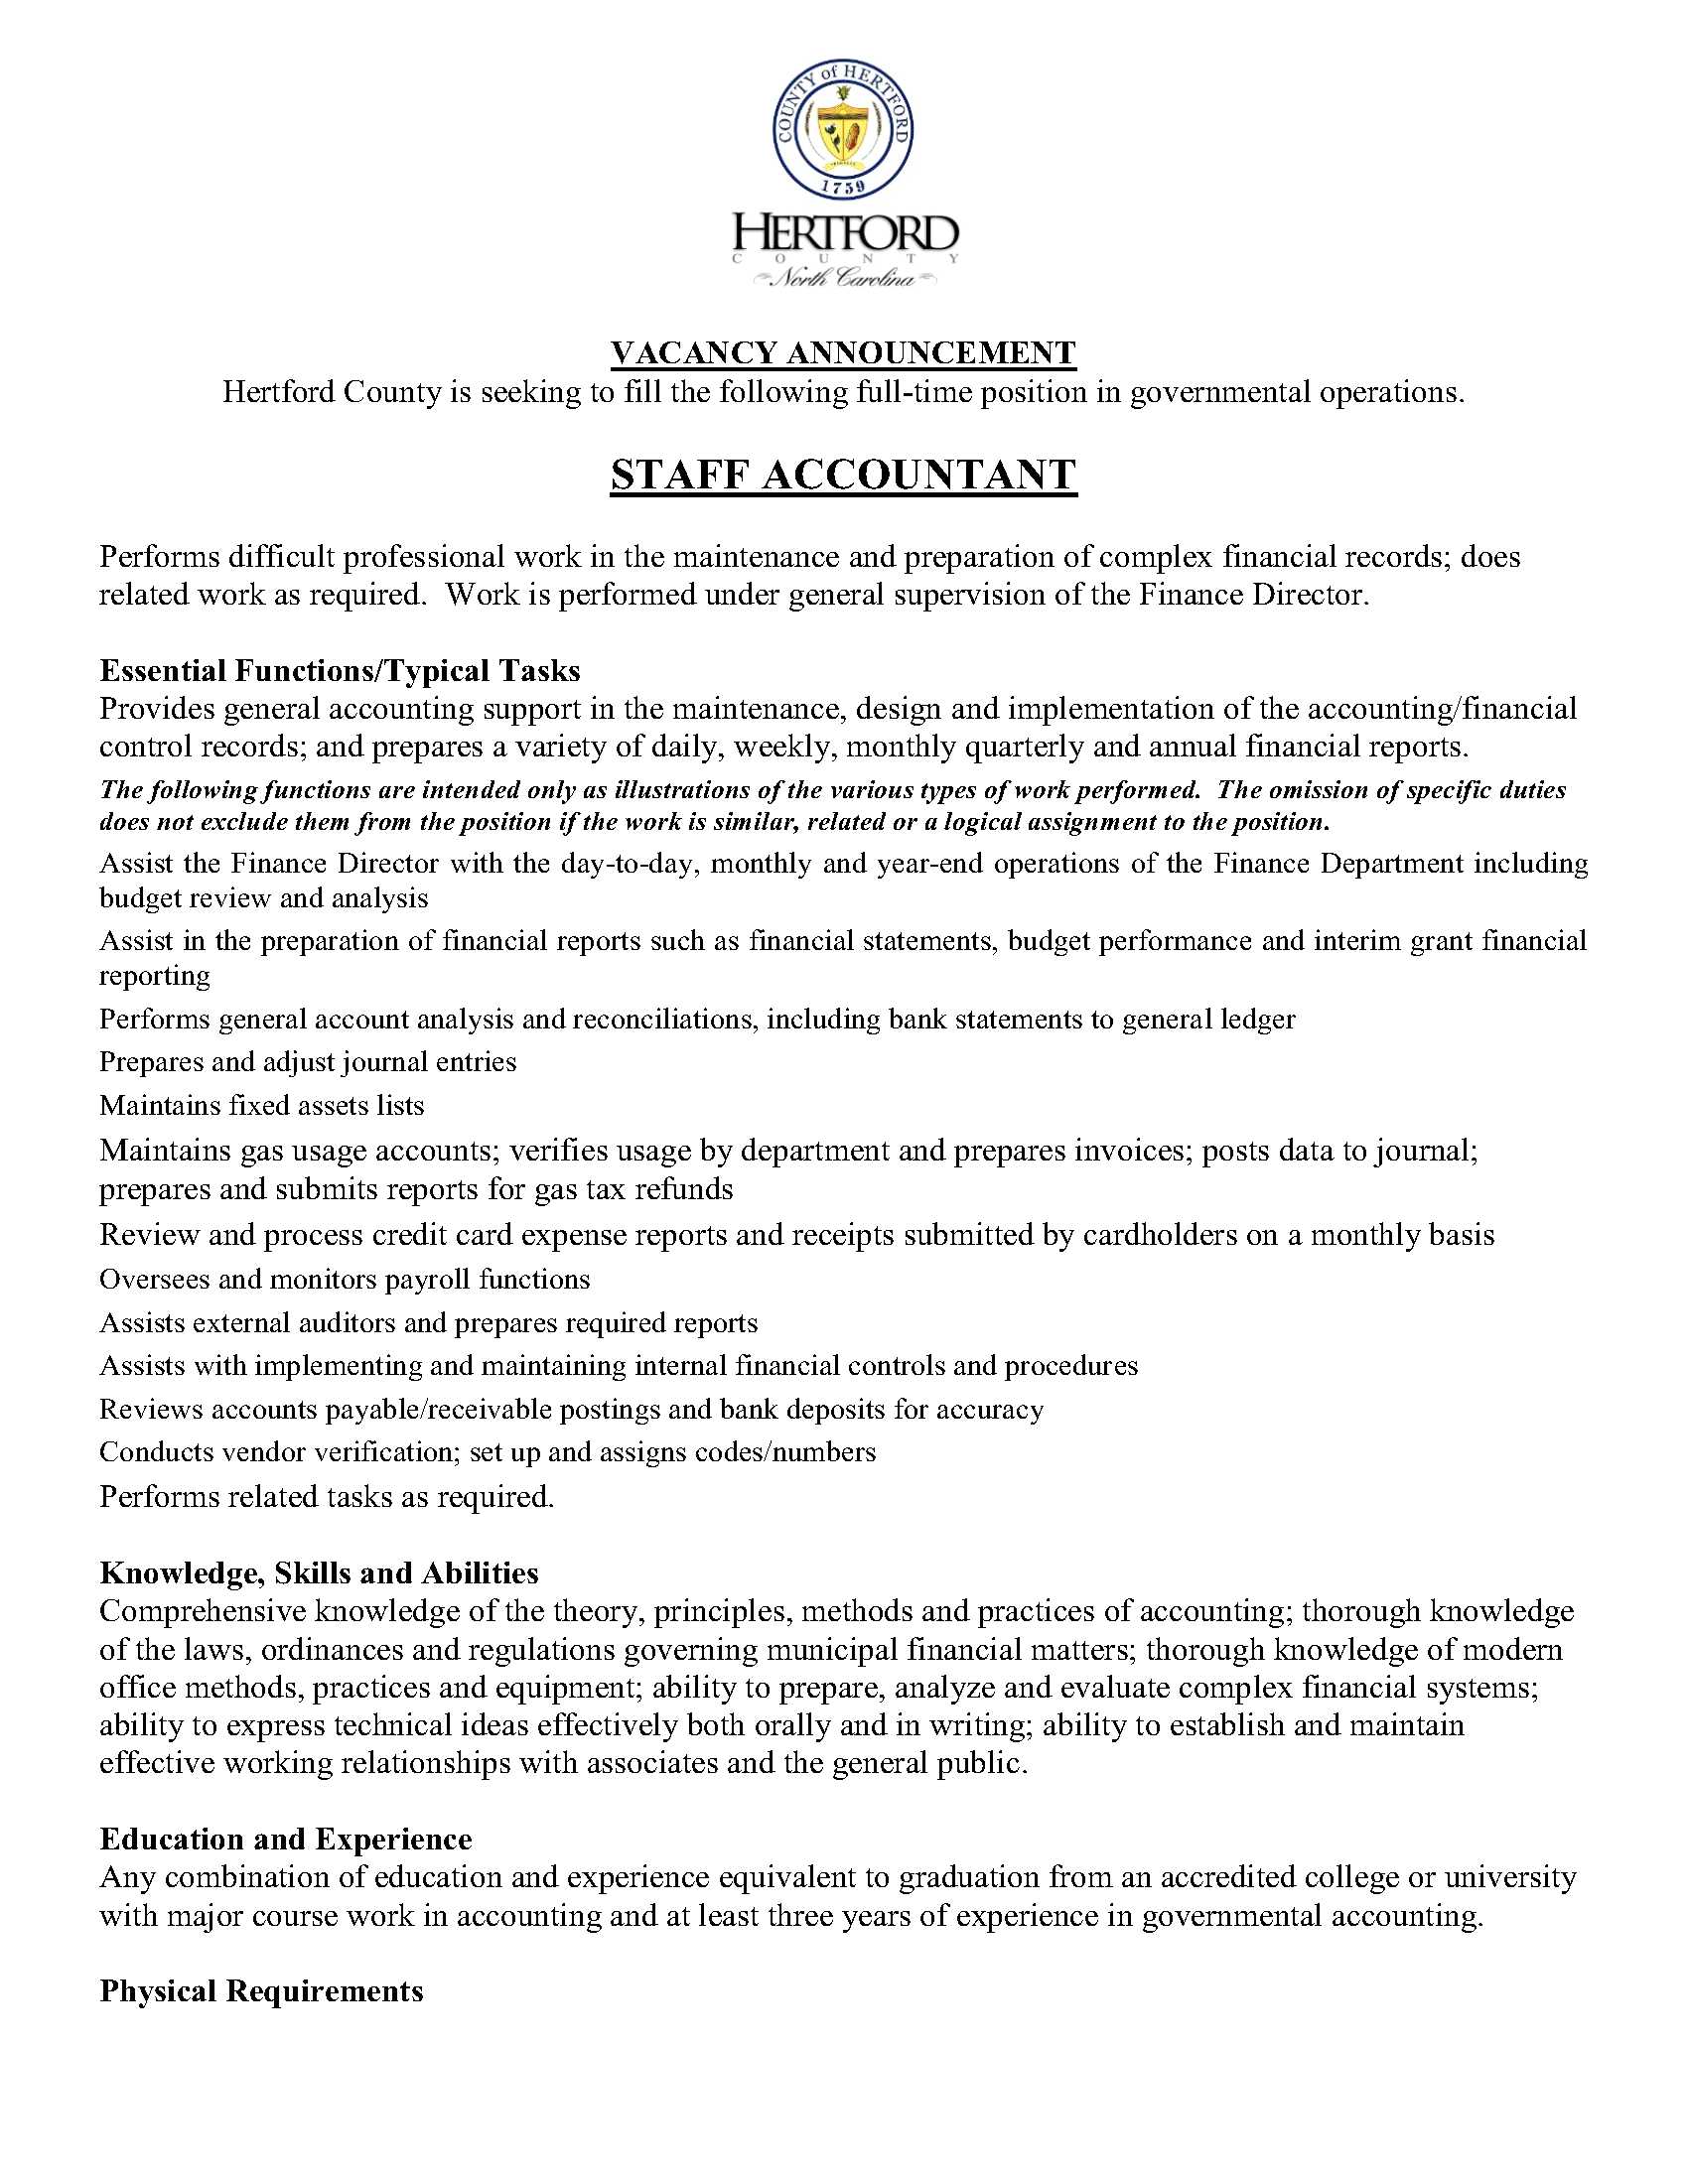 Vacancy Announcement Staff Accountant 6 2 2020_1